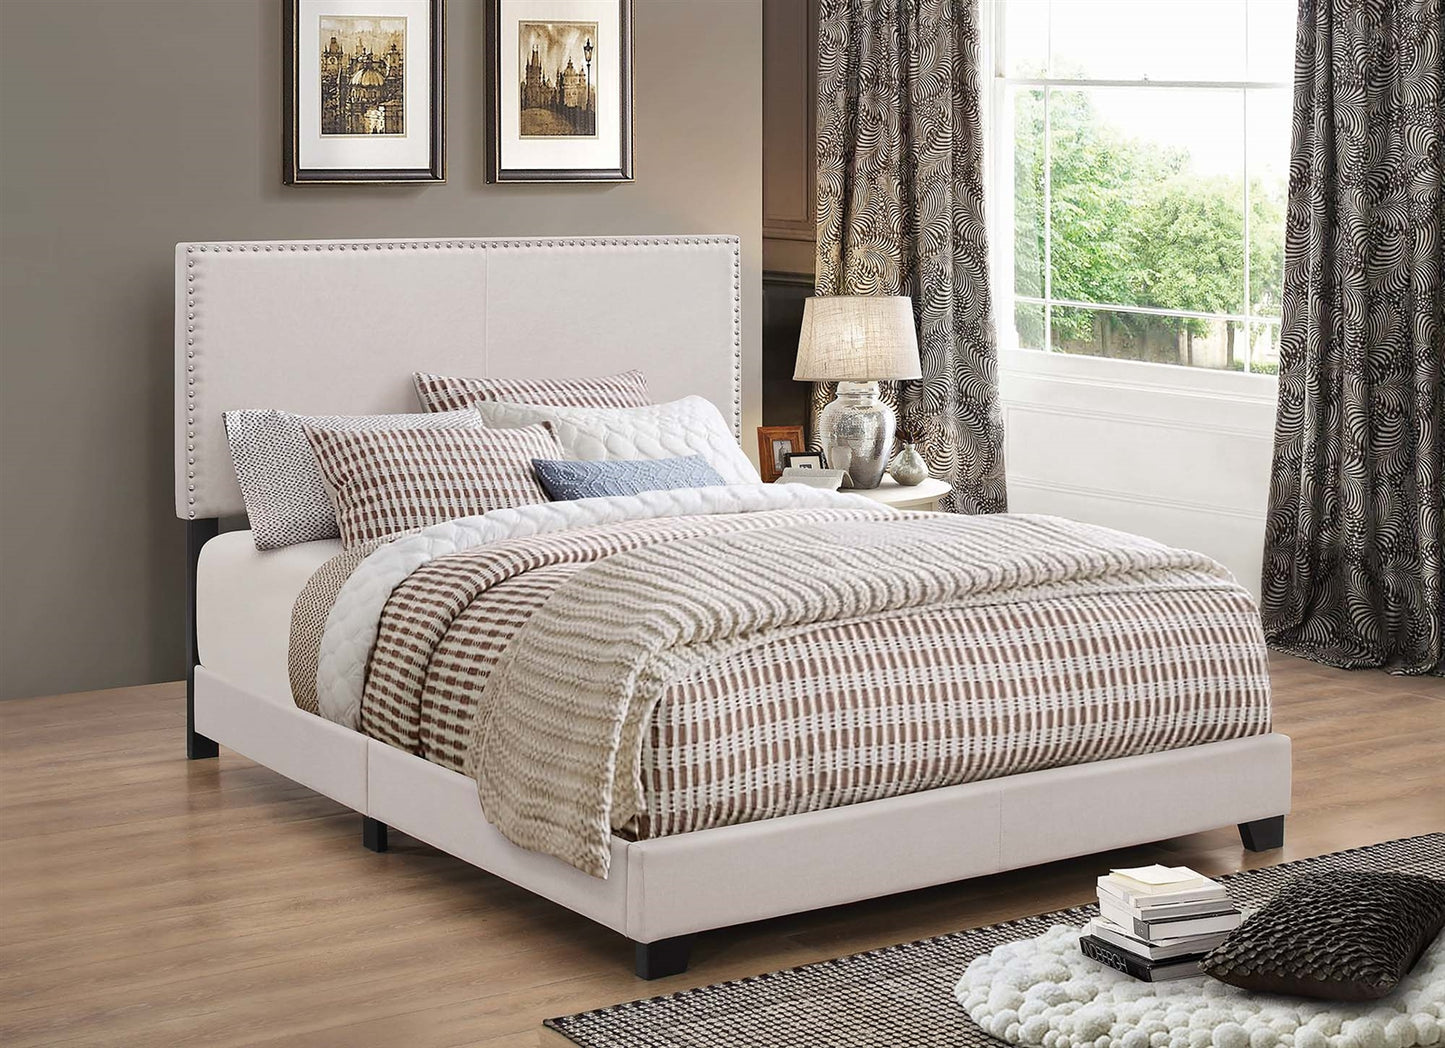 Indi Ivory Upholstered Queen Bed with Nailhead Trim